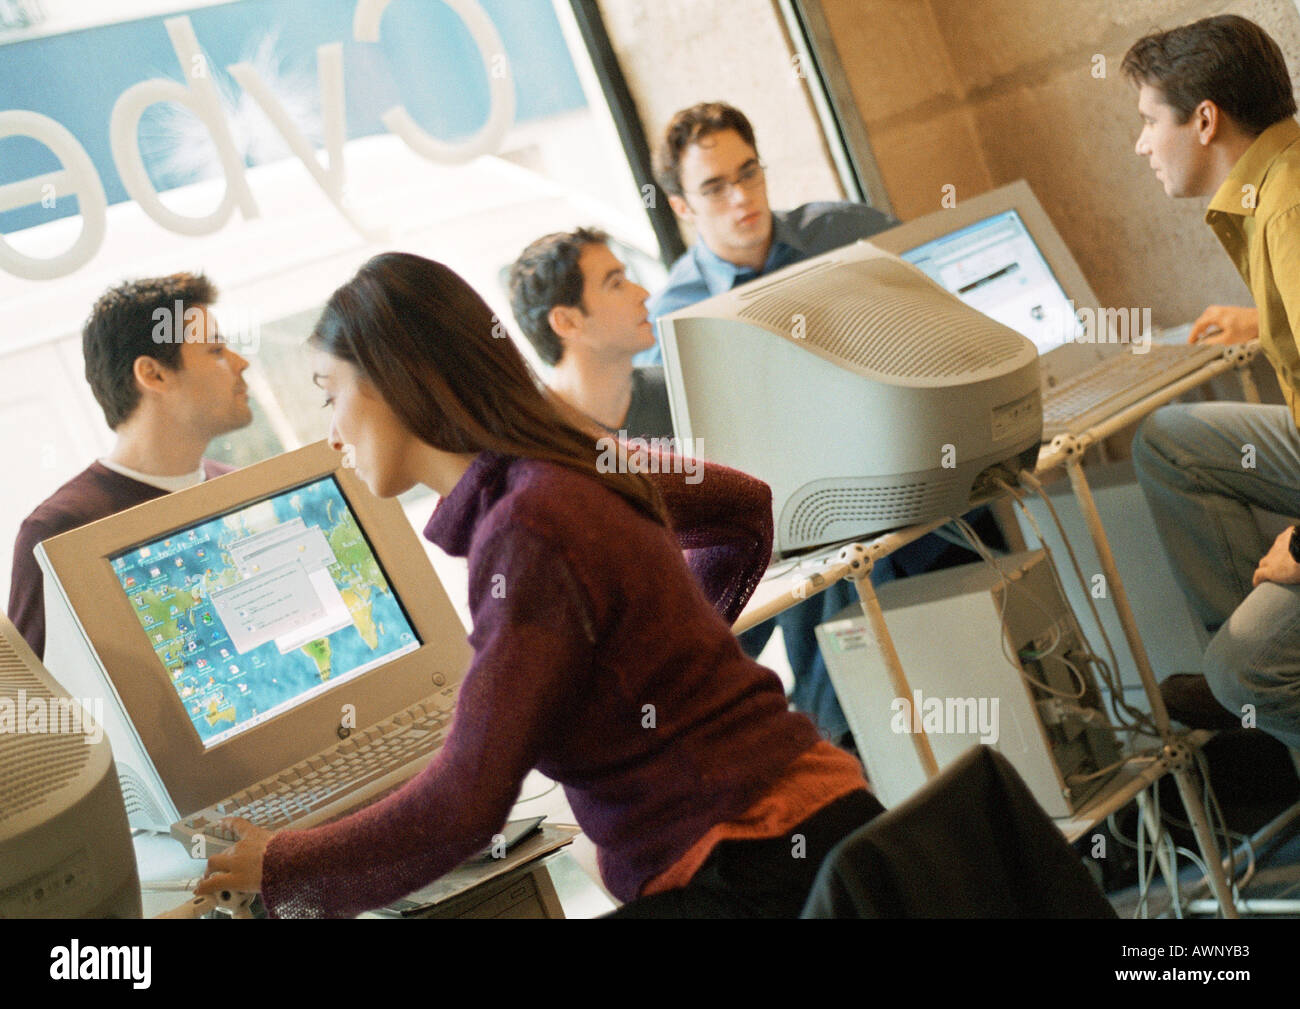 People in cyber cafe Stock Photo